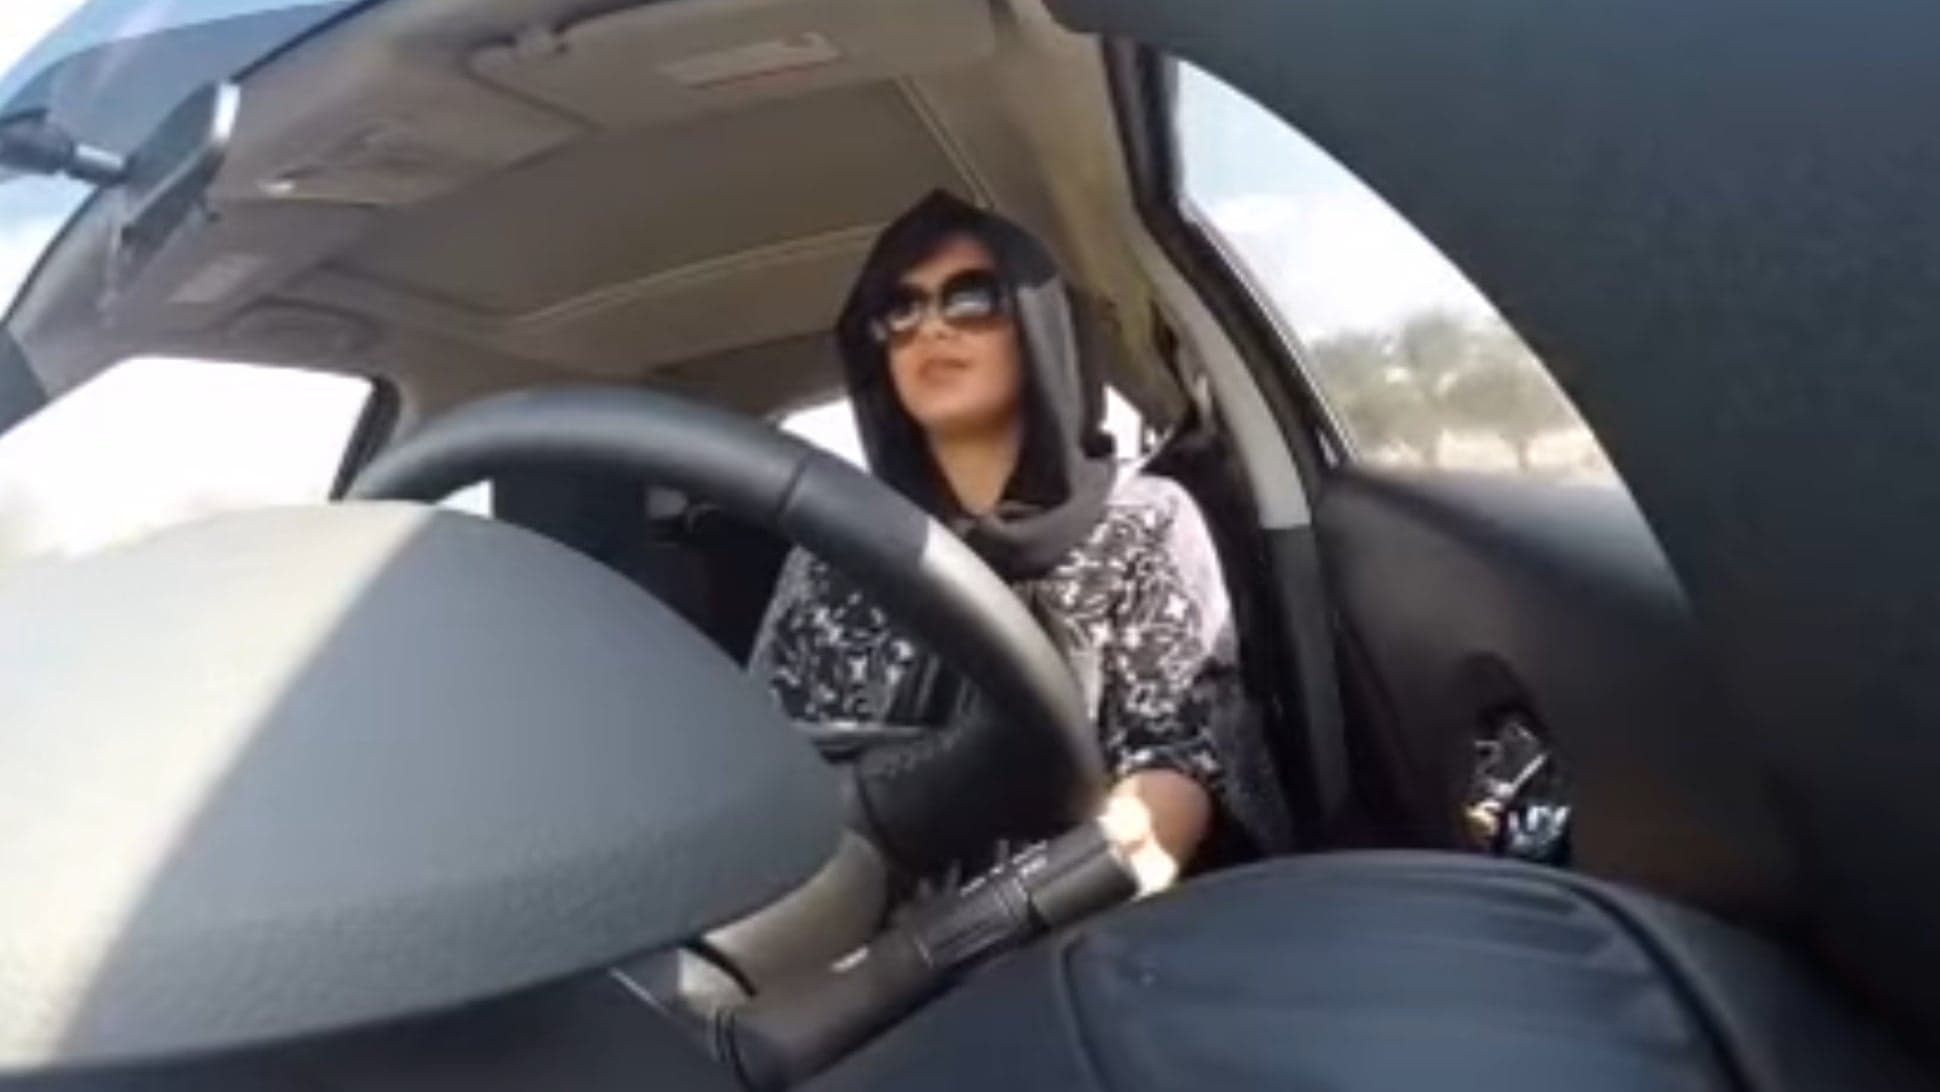 Activist Who Fought to End Saudi Arabia’s Ban on Women Driving Sentenced to Prison